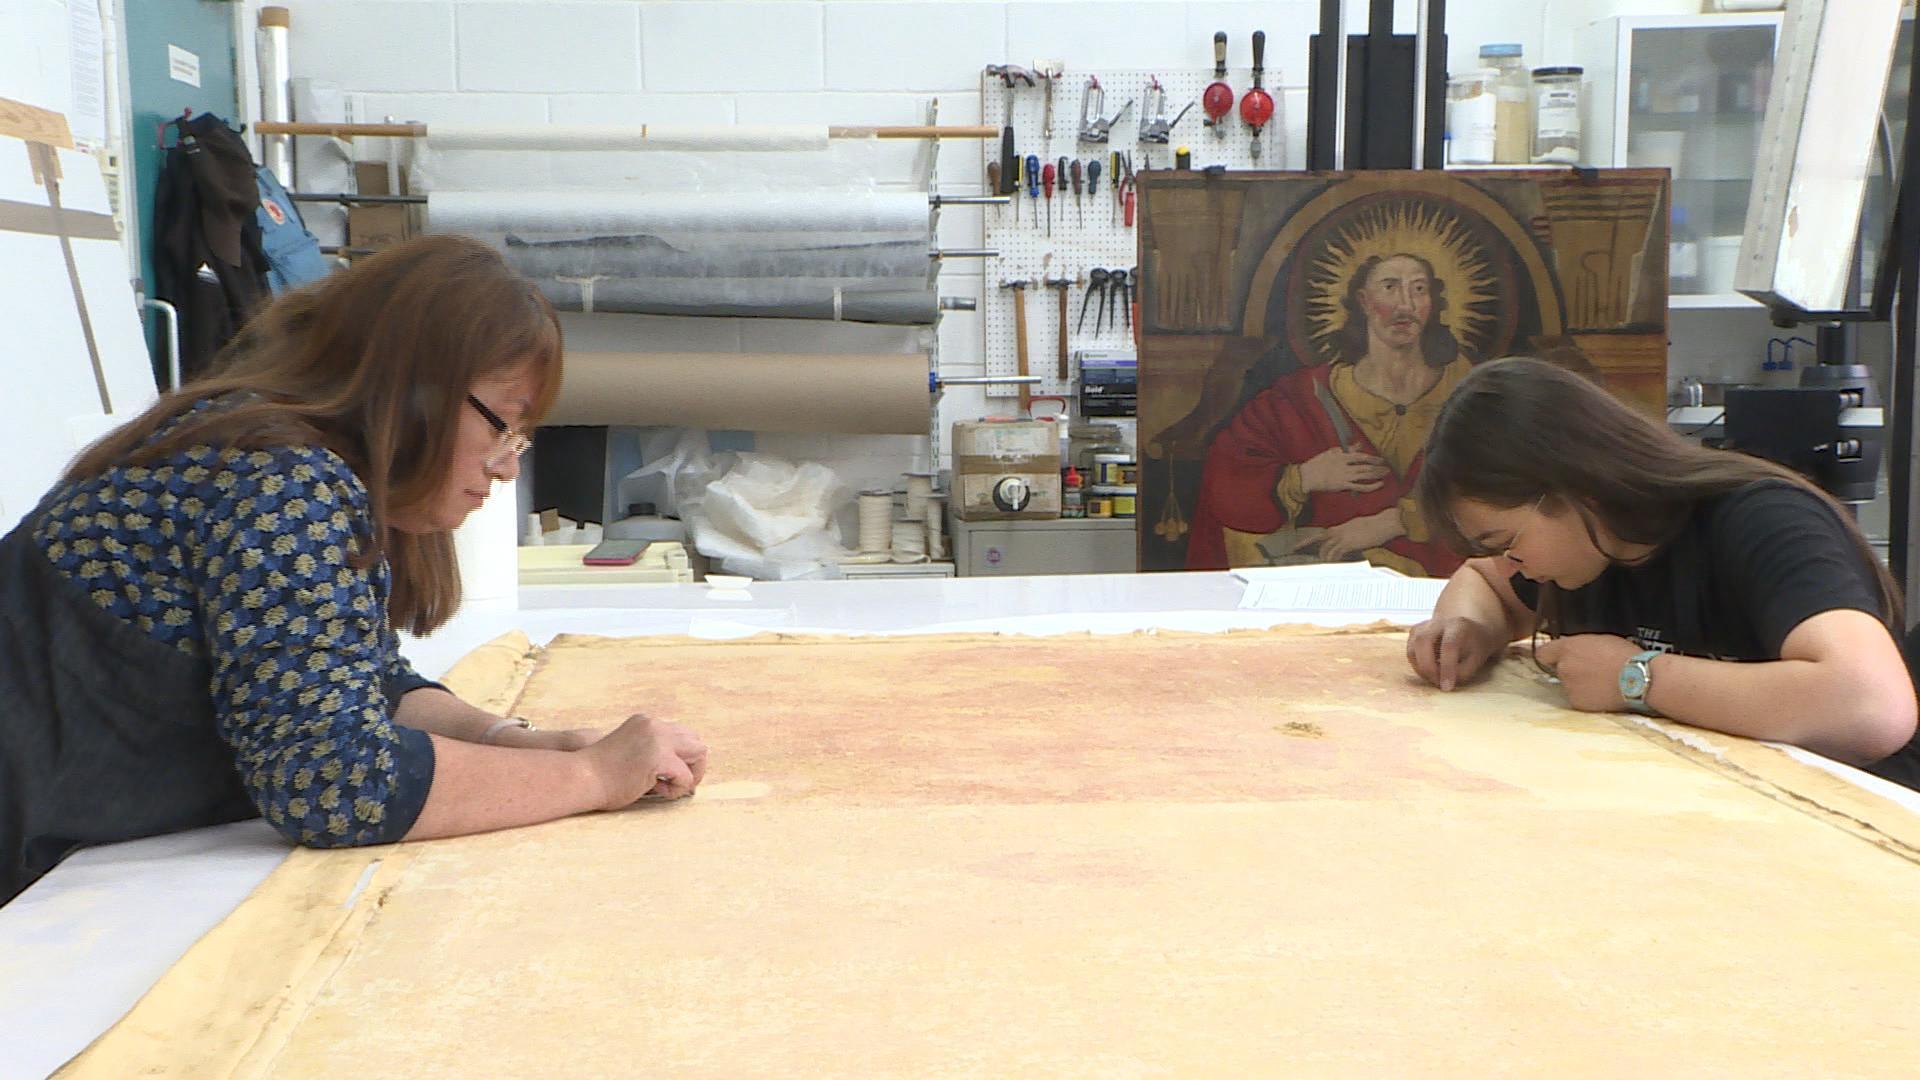 A team from Dundee spent 225 hours restoring the painting. 